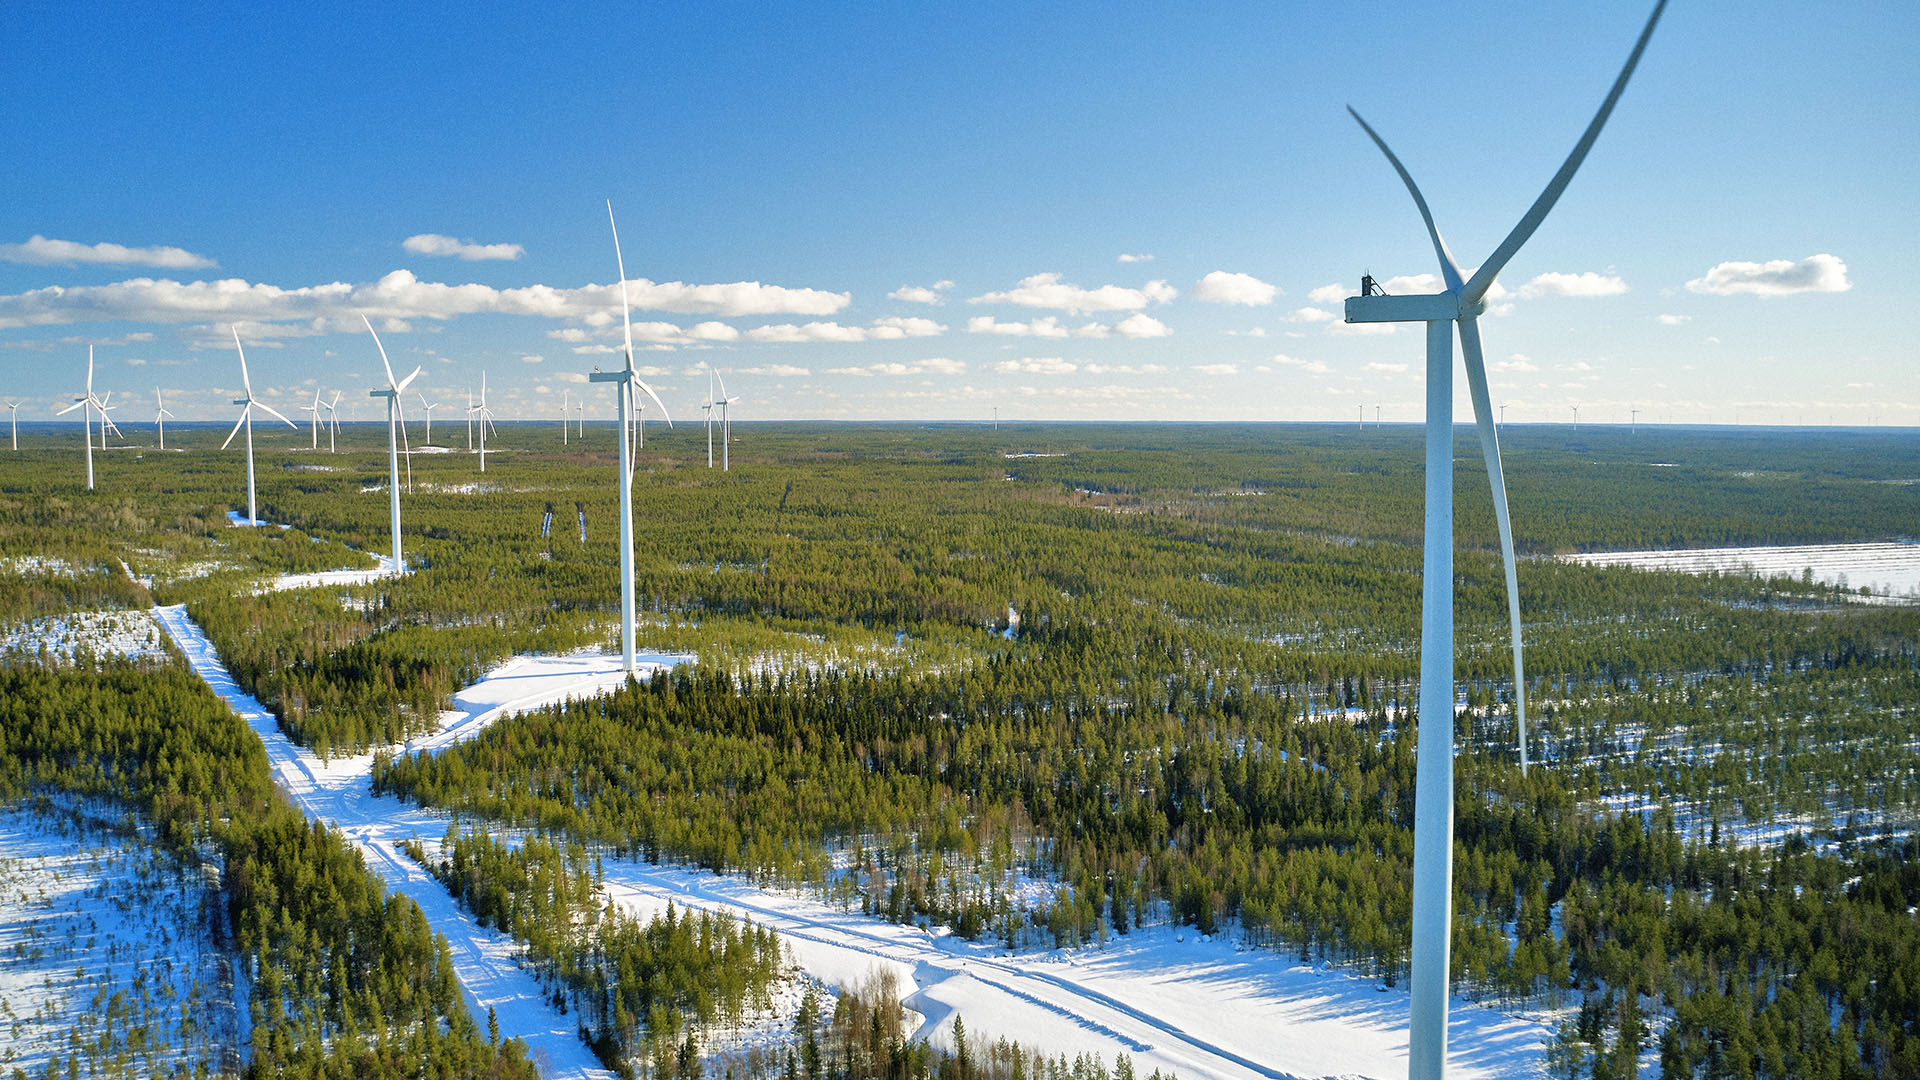 Securing a Greener Grid: Philips, HEINEKEN, Nobian and Signify power European operations with clean electricity thanks to new wind energy initiative